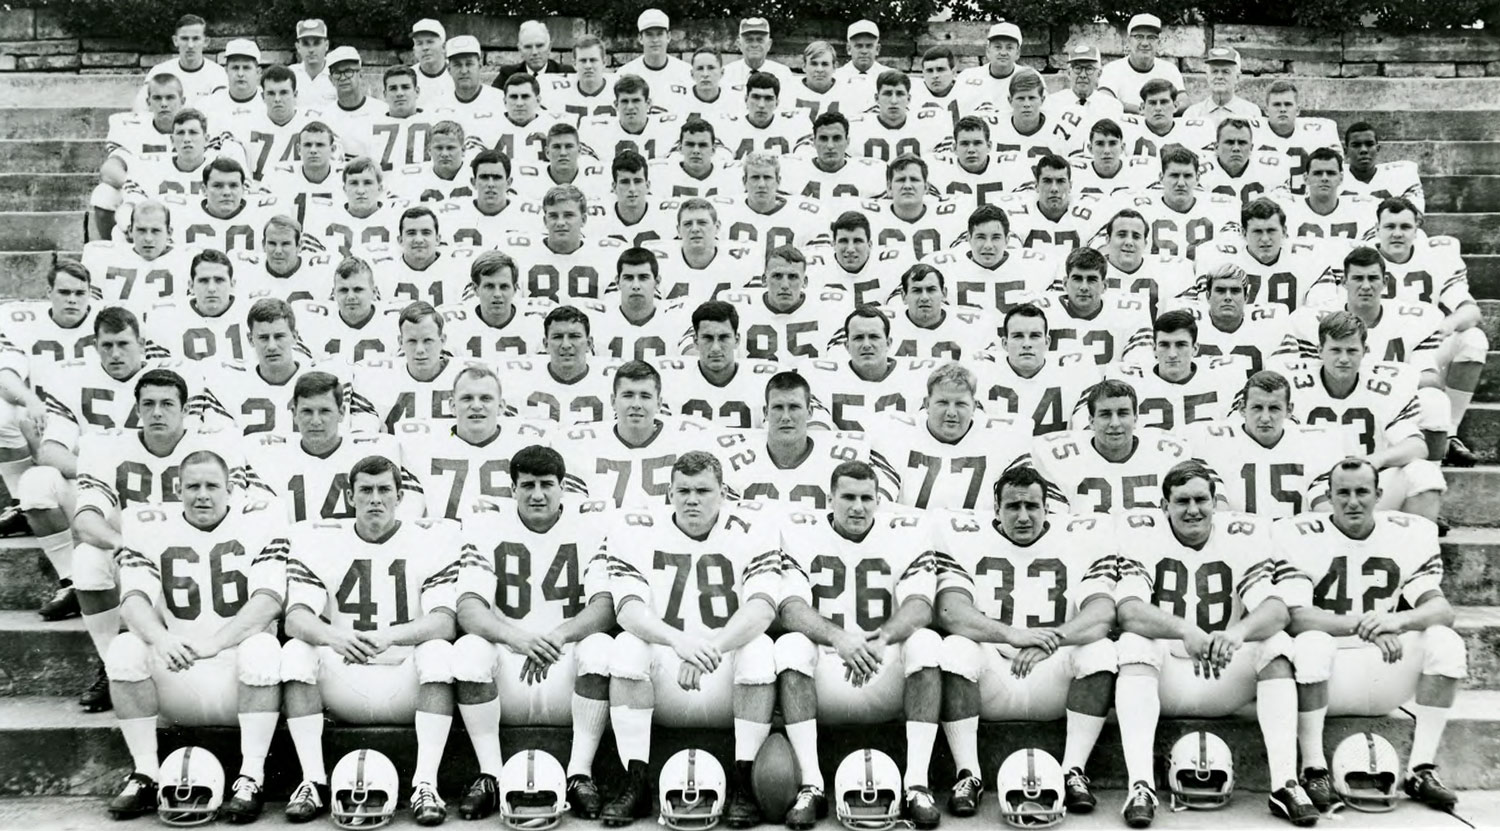 Black and white photo of the UVA football team in 1967